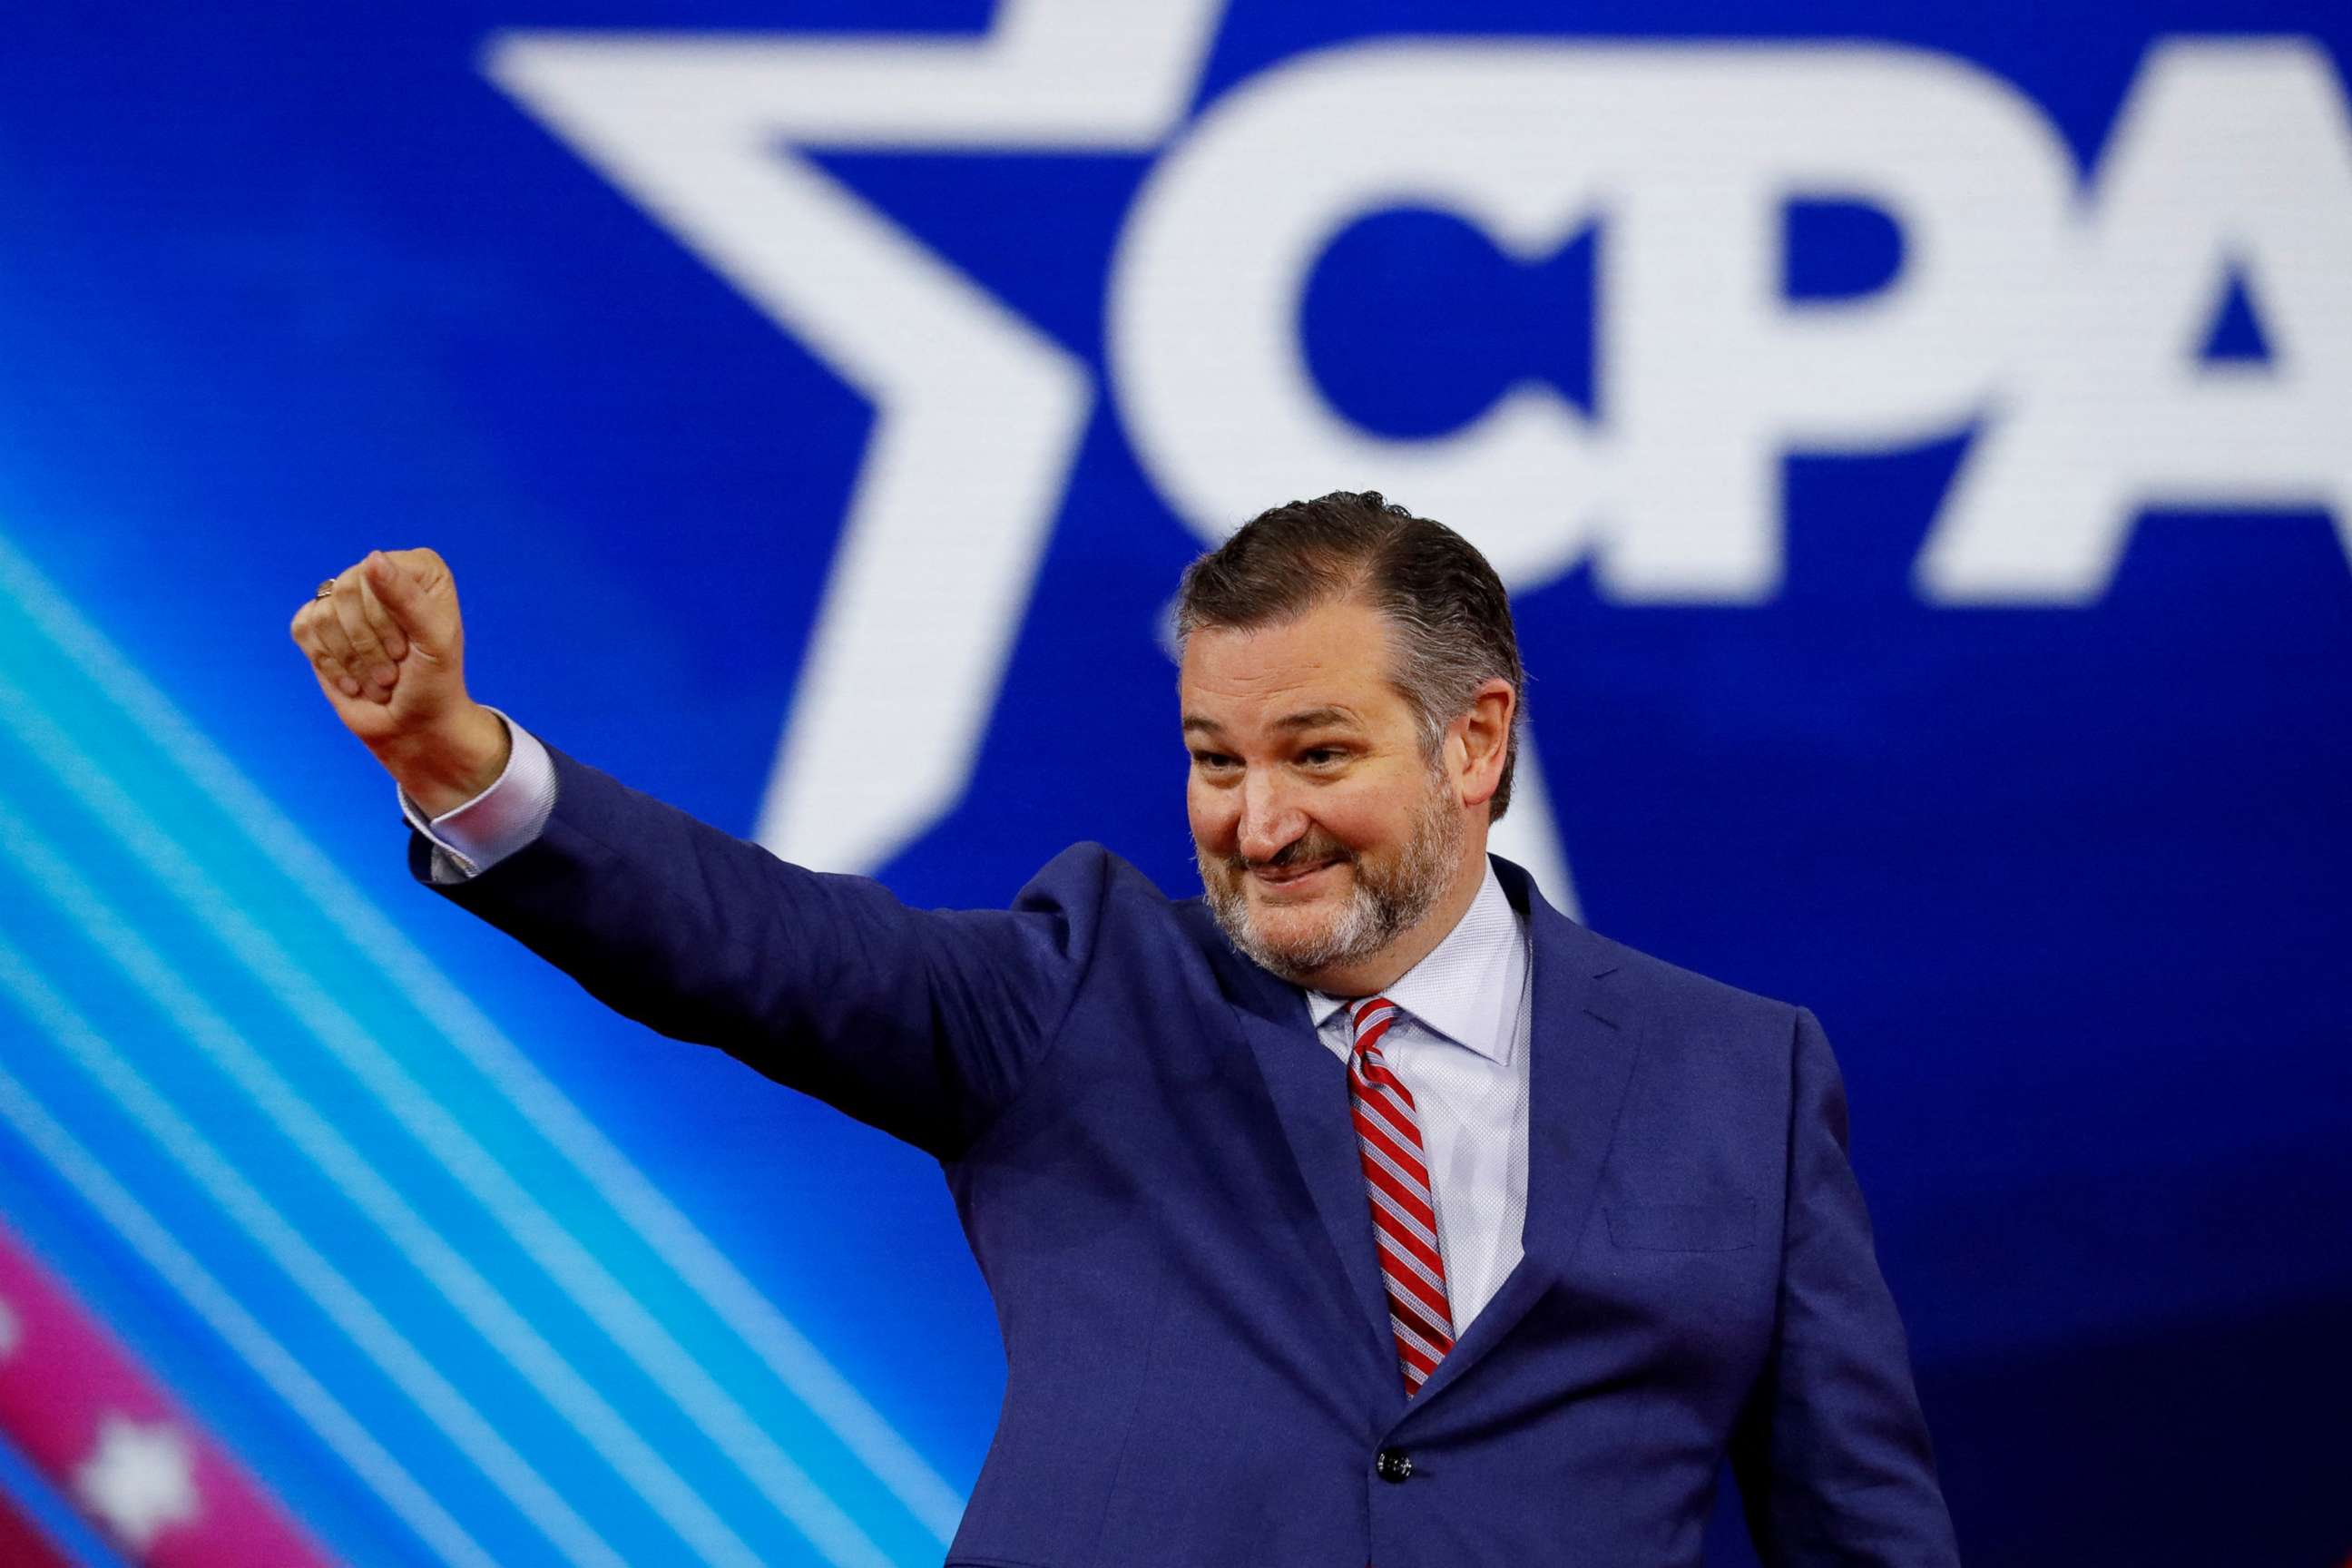 PHOTO: Senator Ted Cruz gestures as he speaks at the Conservative Political Action Conference (CPAC) in Orlando, Fla., Feb. 24, 2022. 